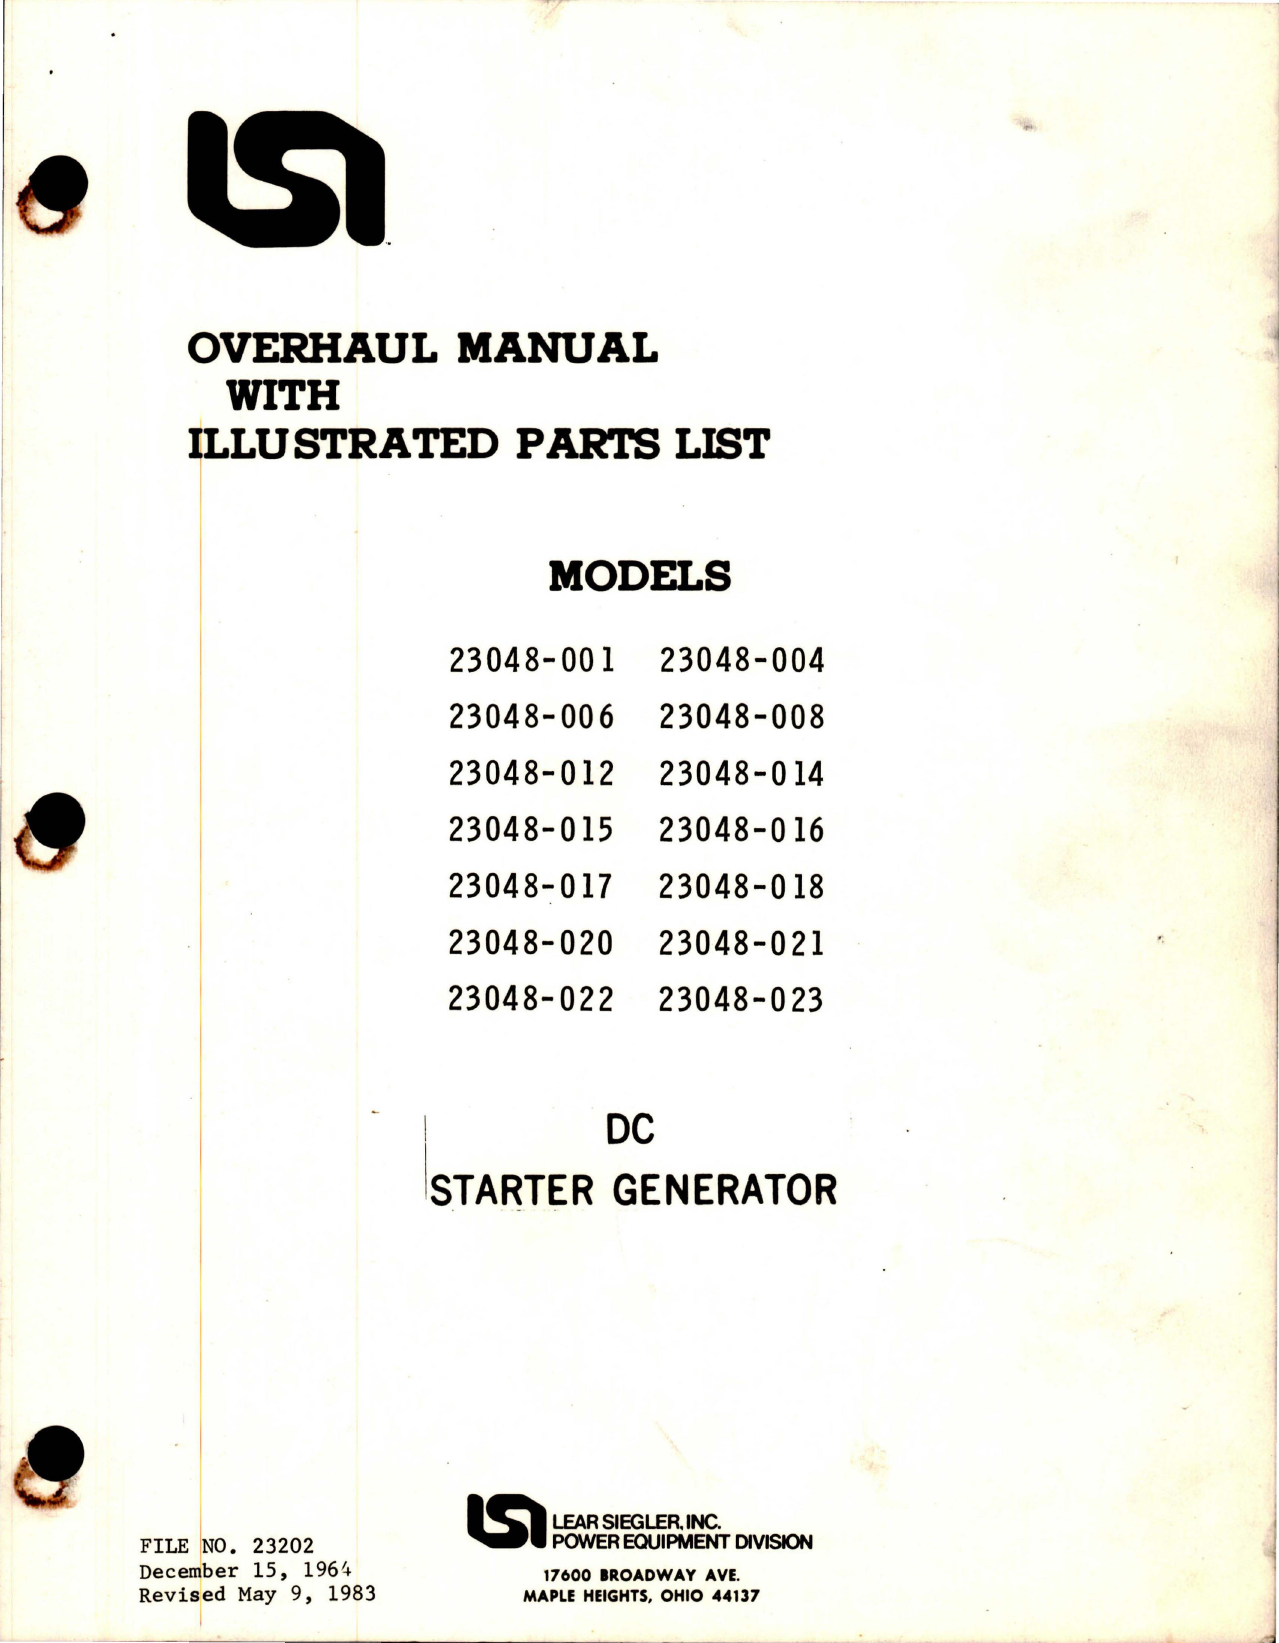 Sample page 1 from AirCorps Library document: Overhaul Manual with Parts List for DC Starter Generator - Model 23048 Series